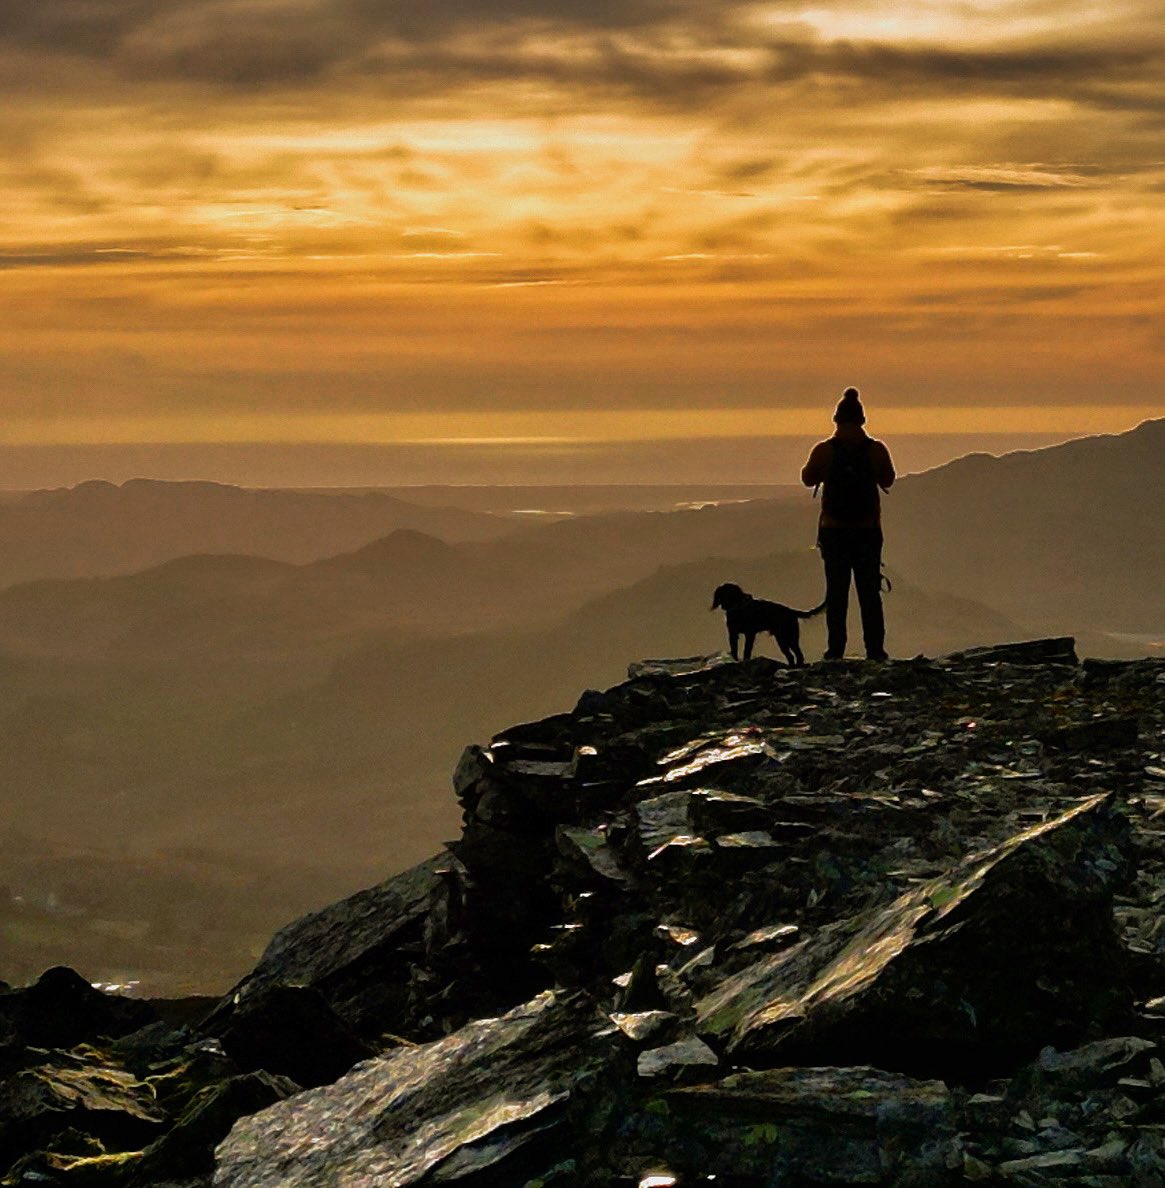 Just me and the dog….
#snowdonia #exploresnowdonia #visitwales #yourwales #sunset #northwales